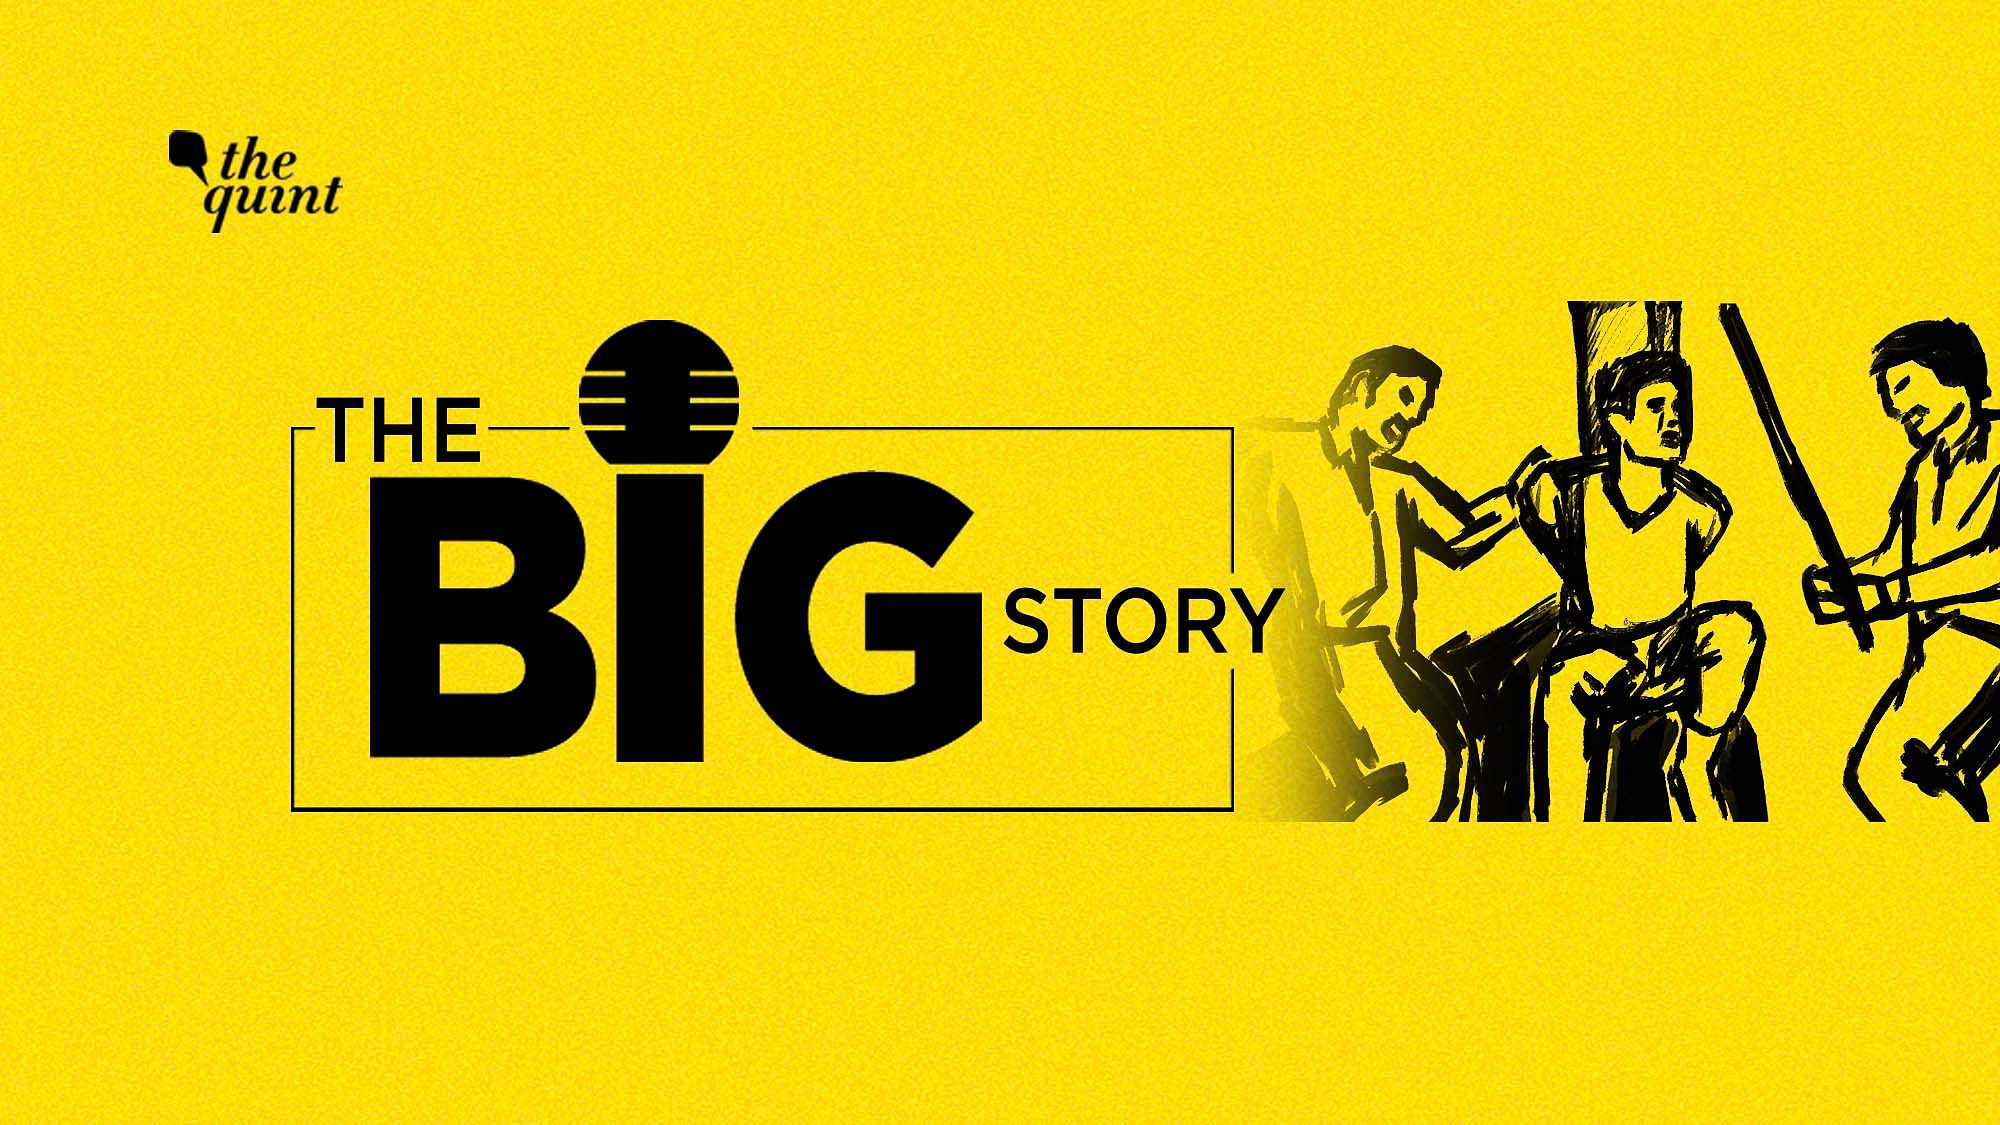 So have there been no lynchings in India? Is the NCRB missing an important detail in their oh-so-detailed report? That’s what we’ll find out on this edition of The Big Story podcast.